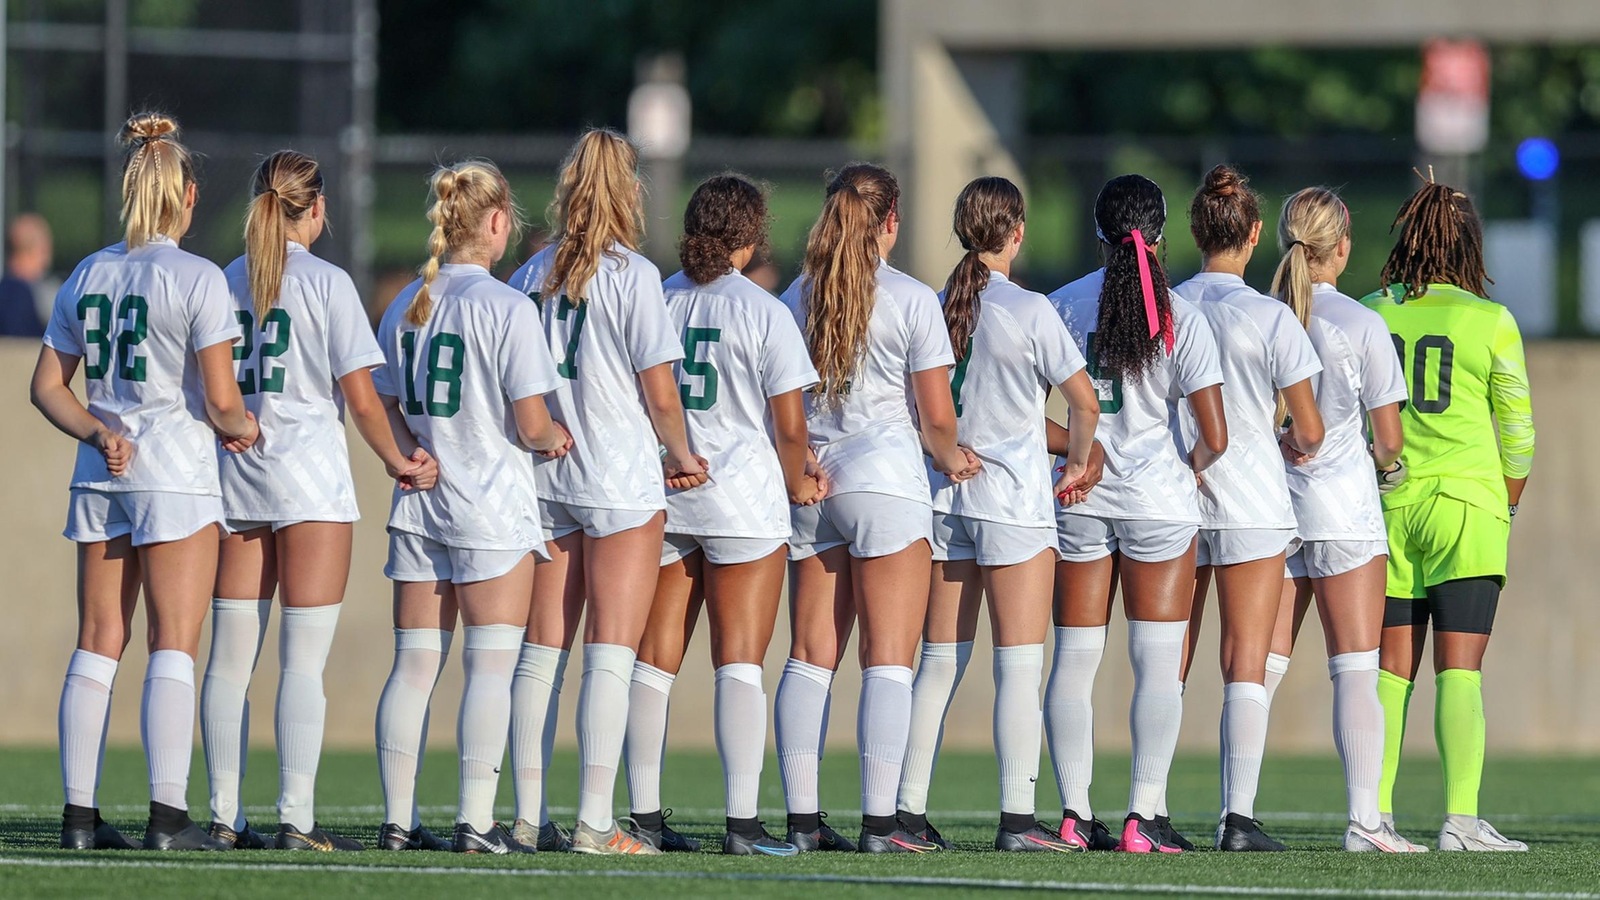 Cleveland State Women's Soccer #HLWSOC Play Continues Against Milwaukee and Northern Kentucky